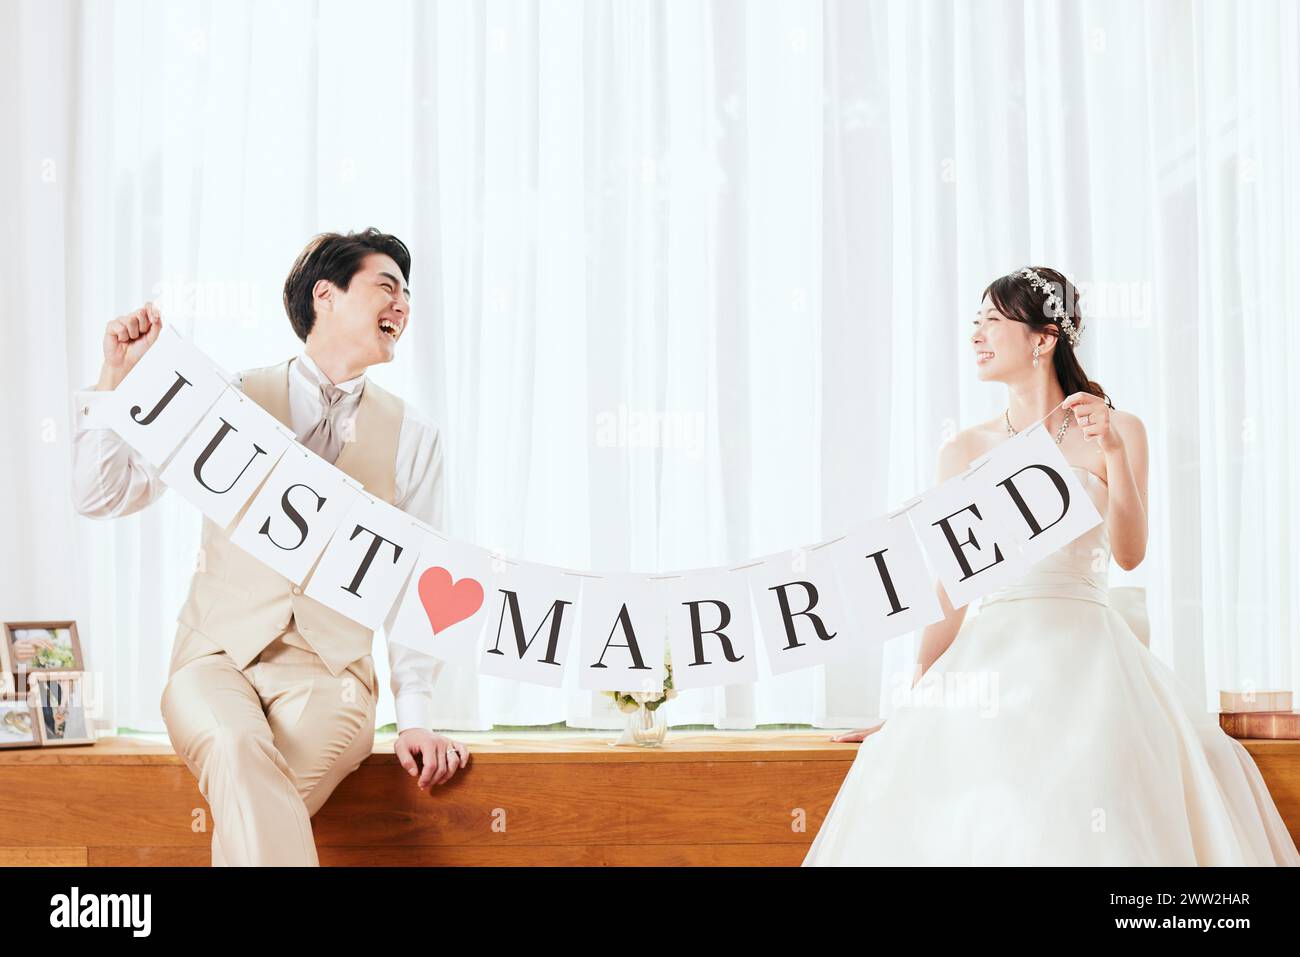 A bride and groom holding up a banner that says just married Stock Photo